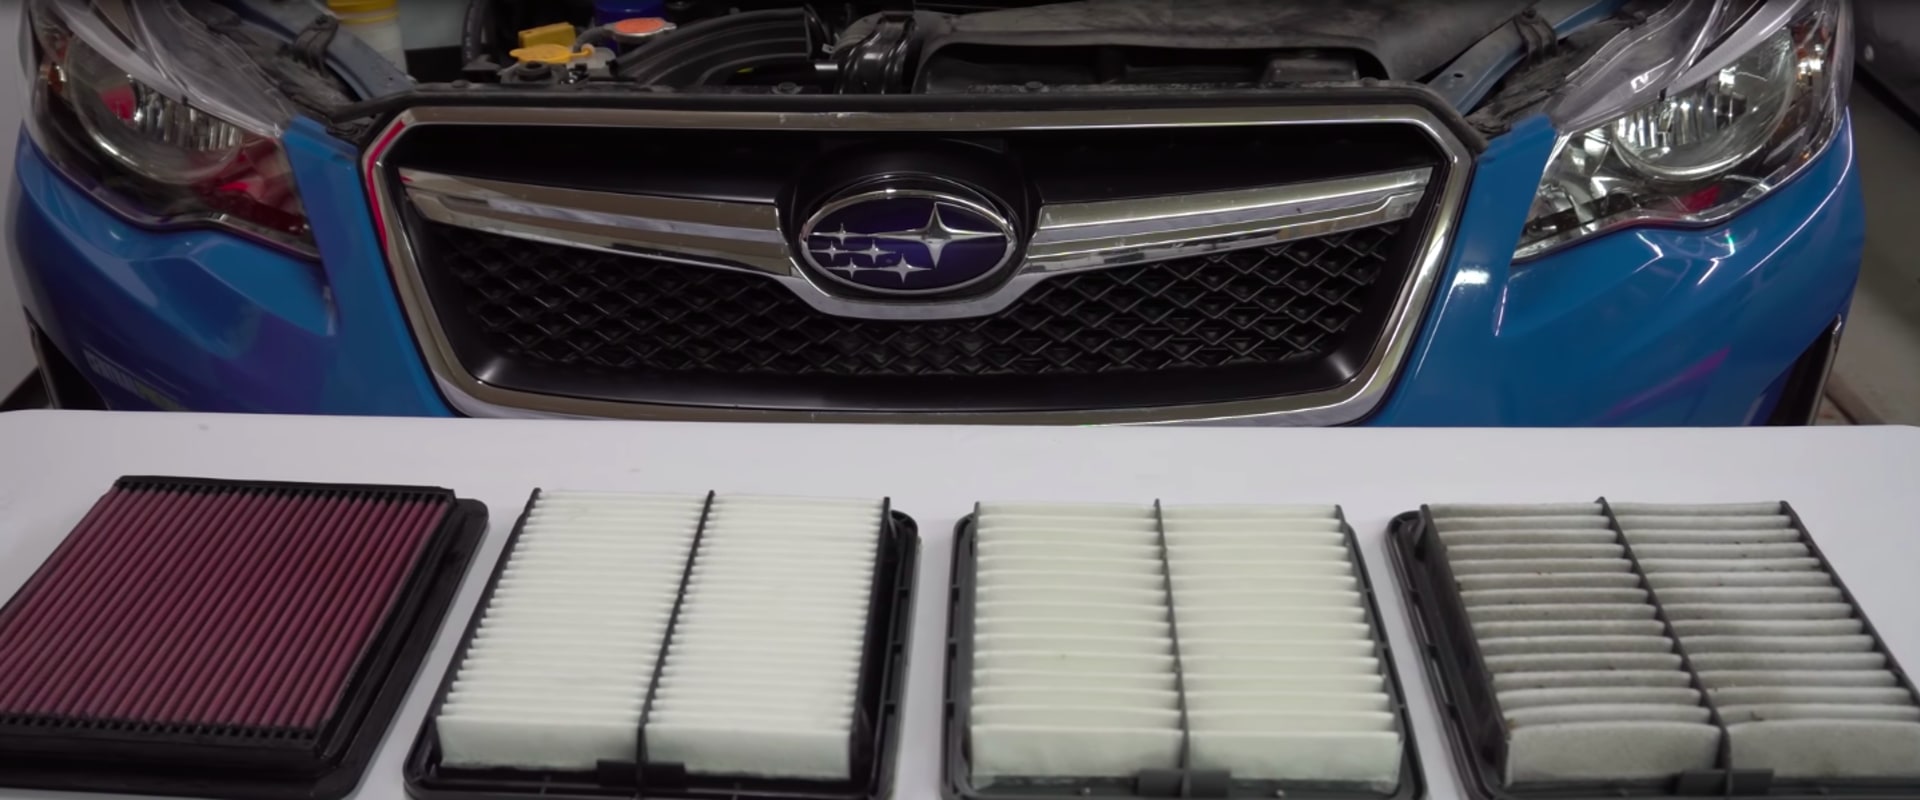 Does an Air Filter Improve Performance?